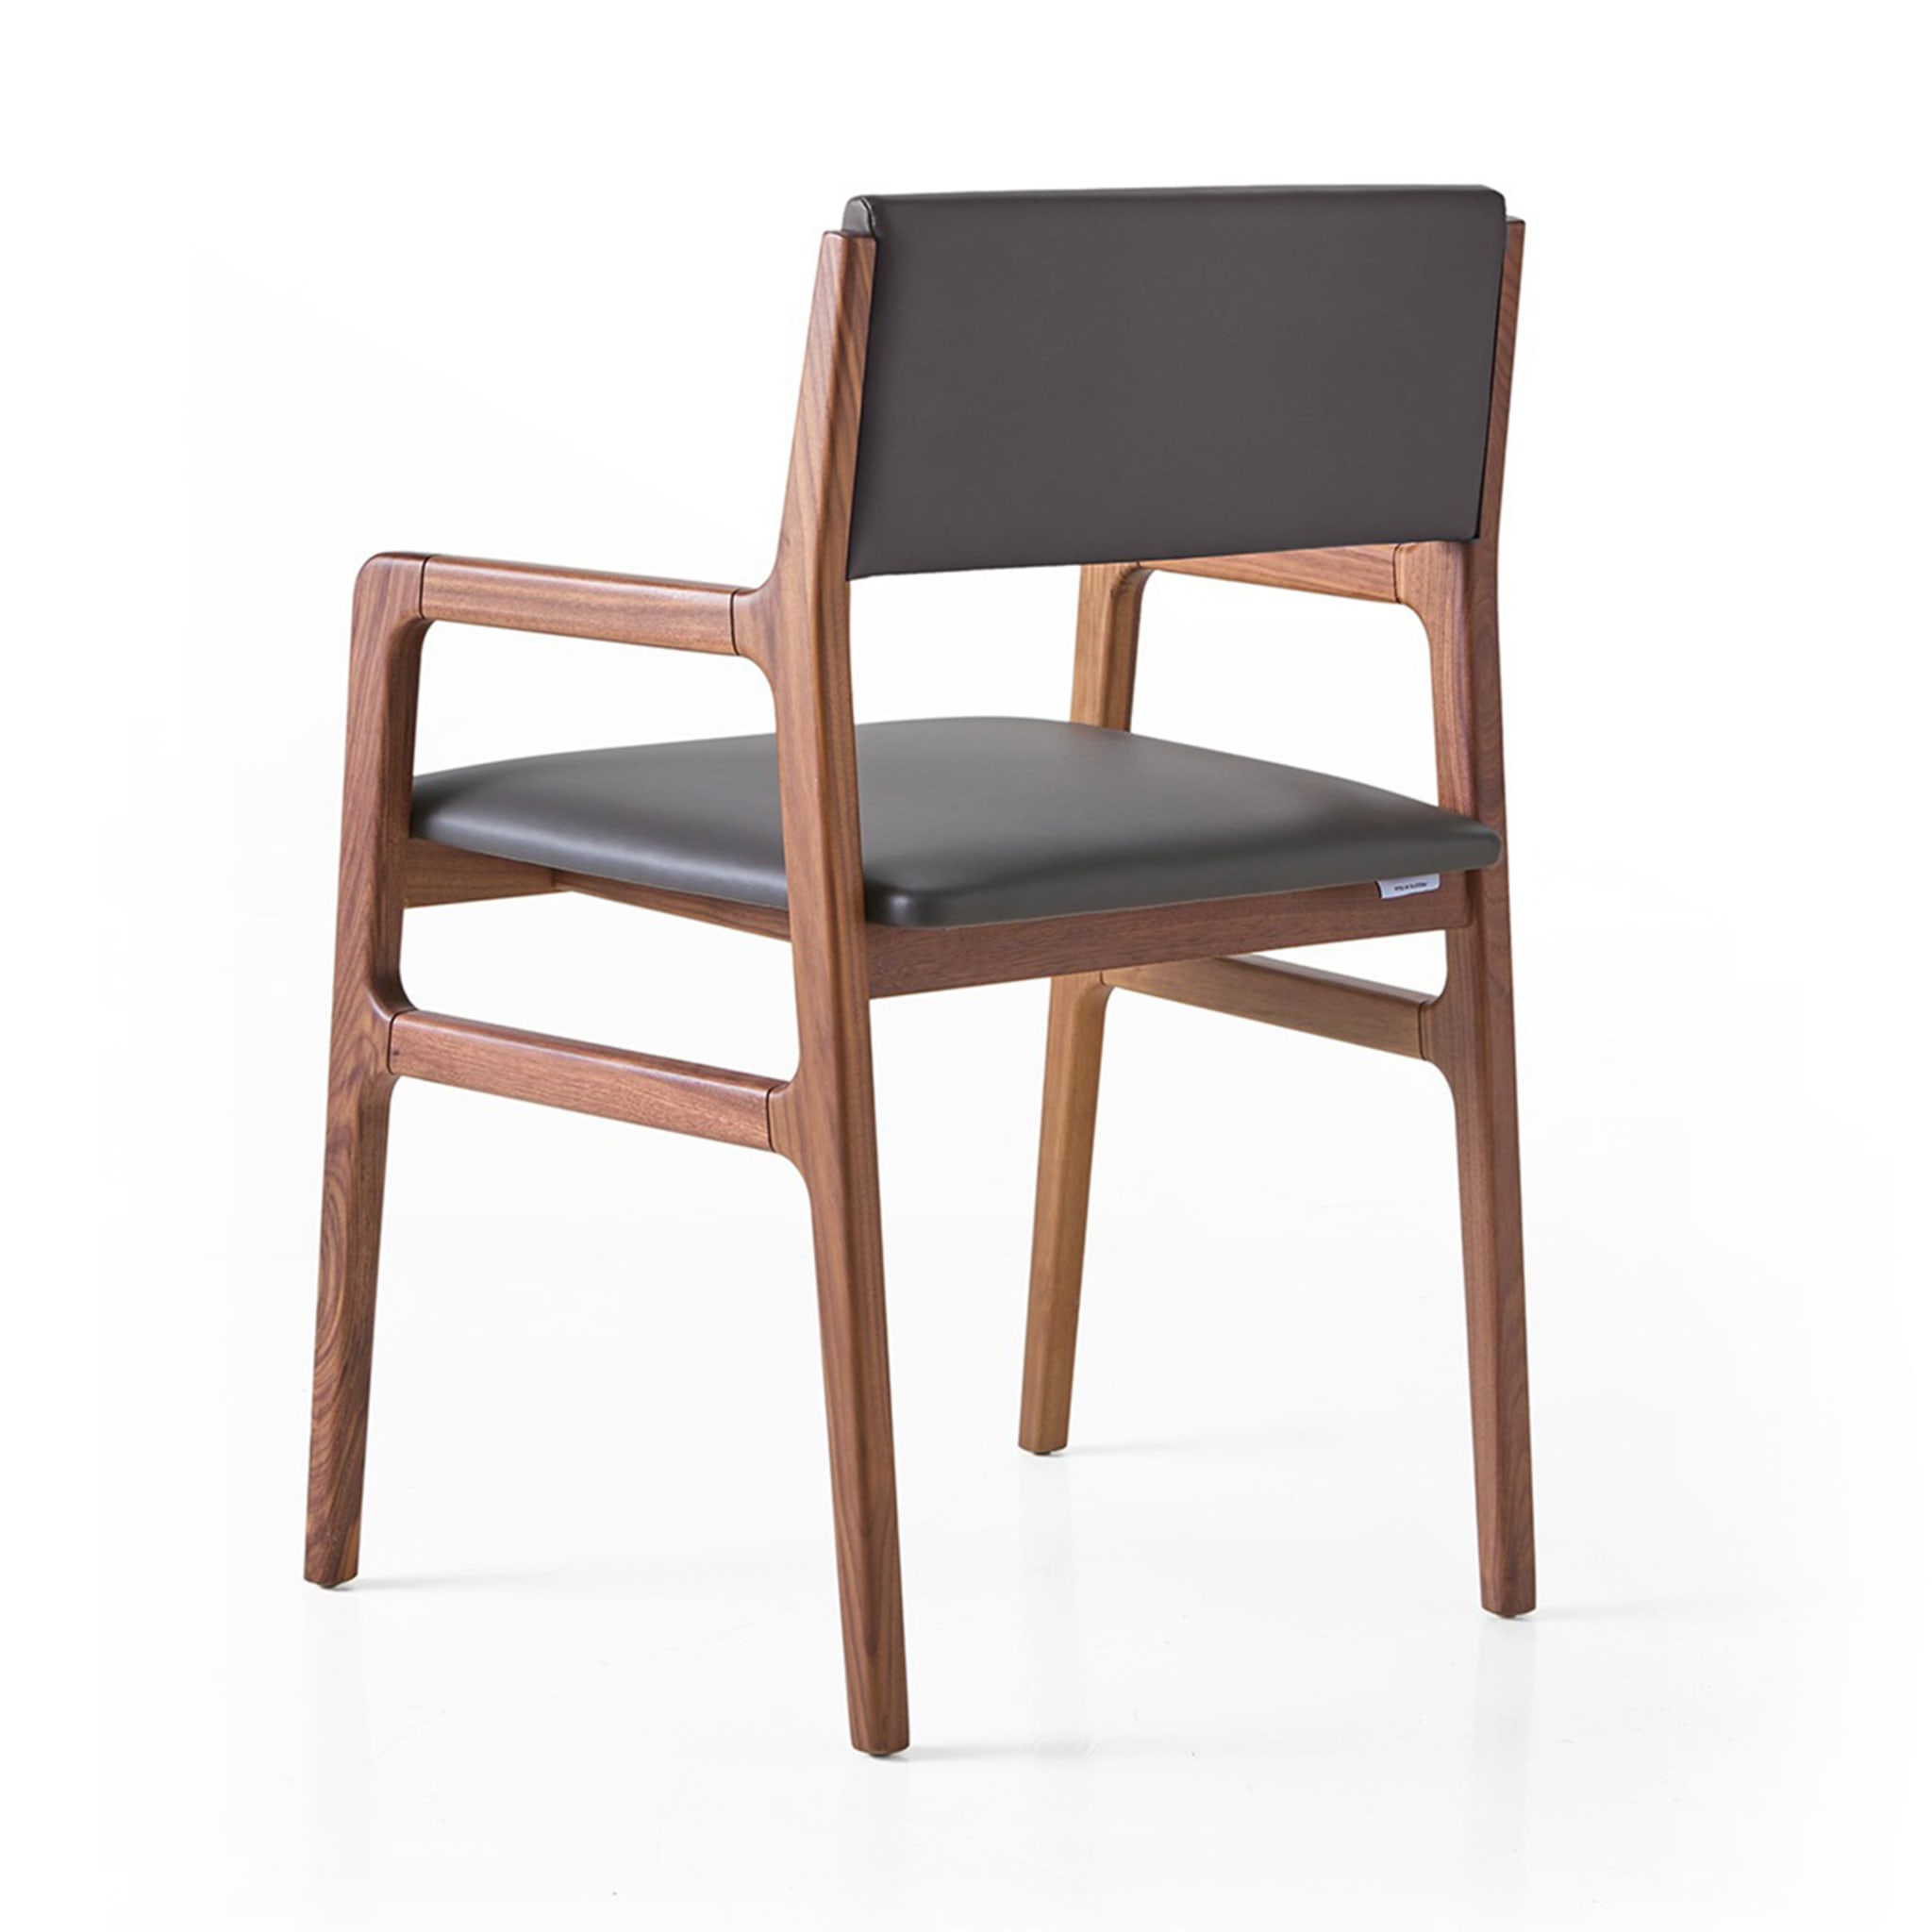 Shanghai chair with armrests - Alternative view 3